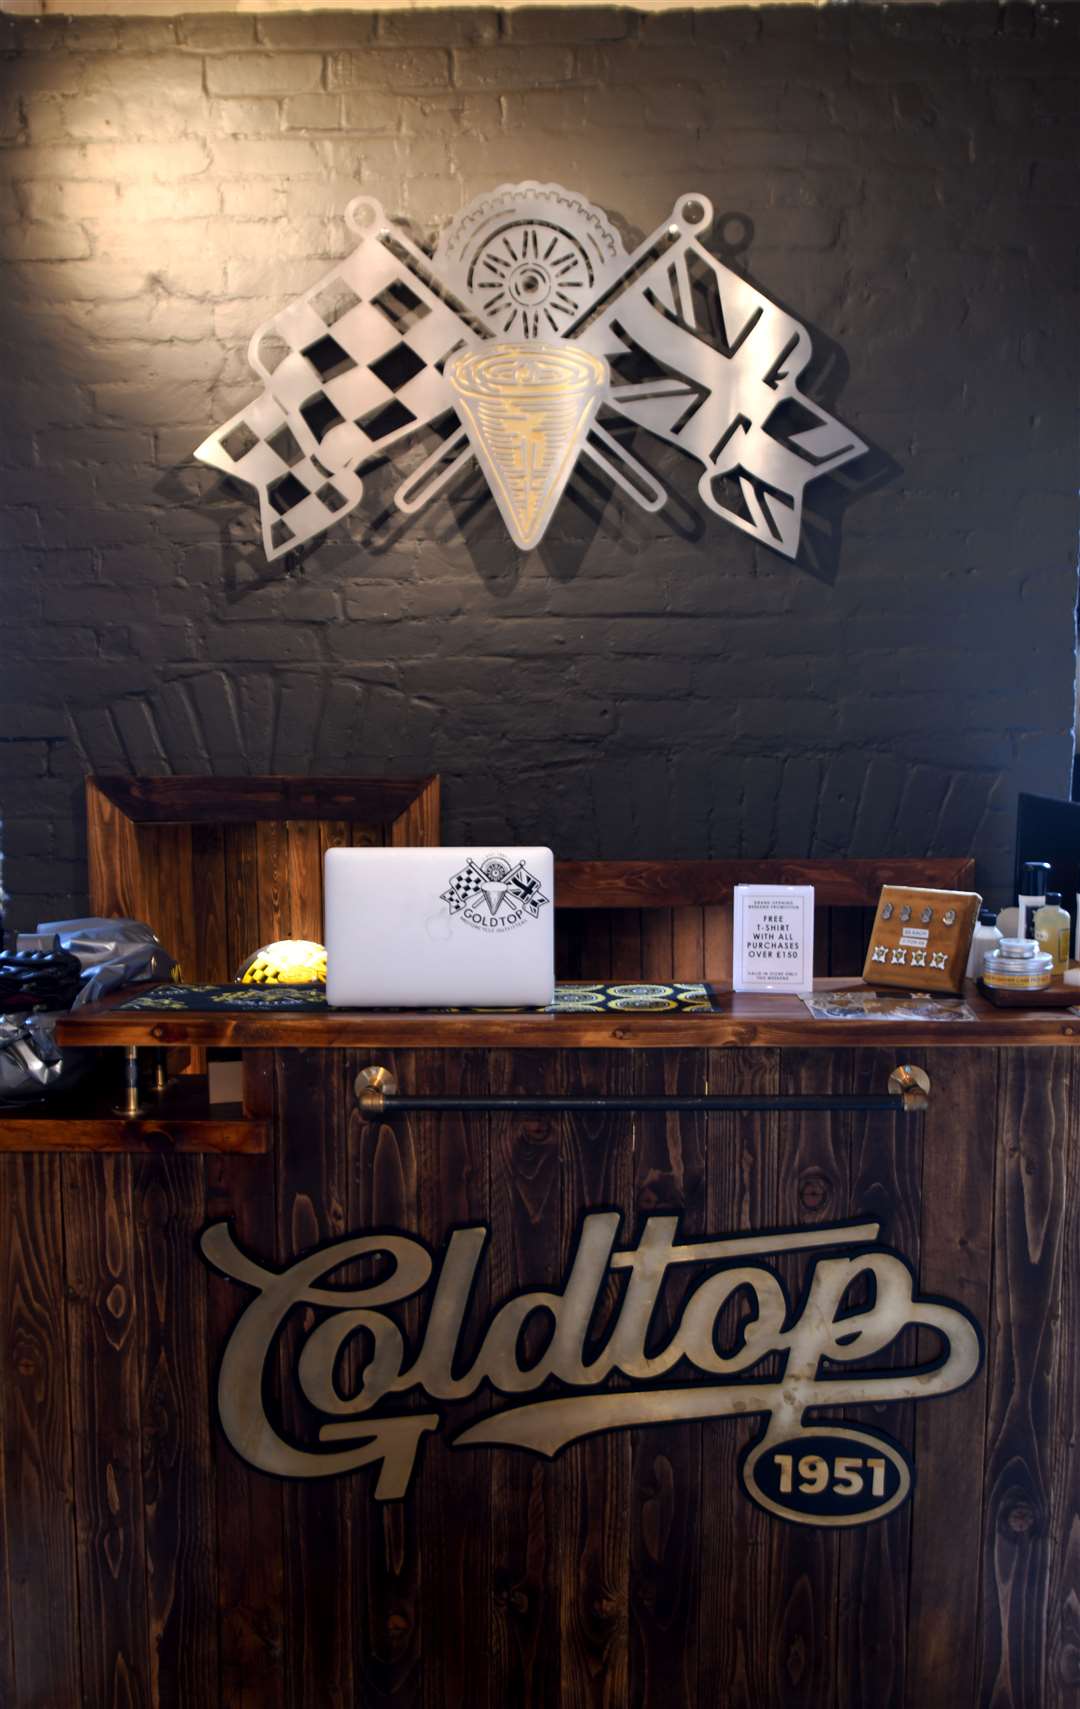 Goldtop at Blyth Farm, Gipsy Lane, Bishop's Stortford – The company has opened physical premises having traded online only since 2012. Picture: Vikki Lince (49535600)